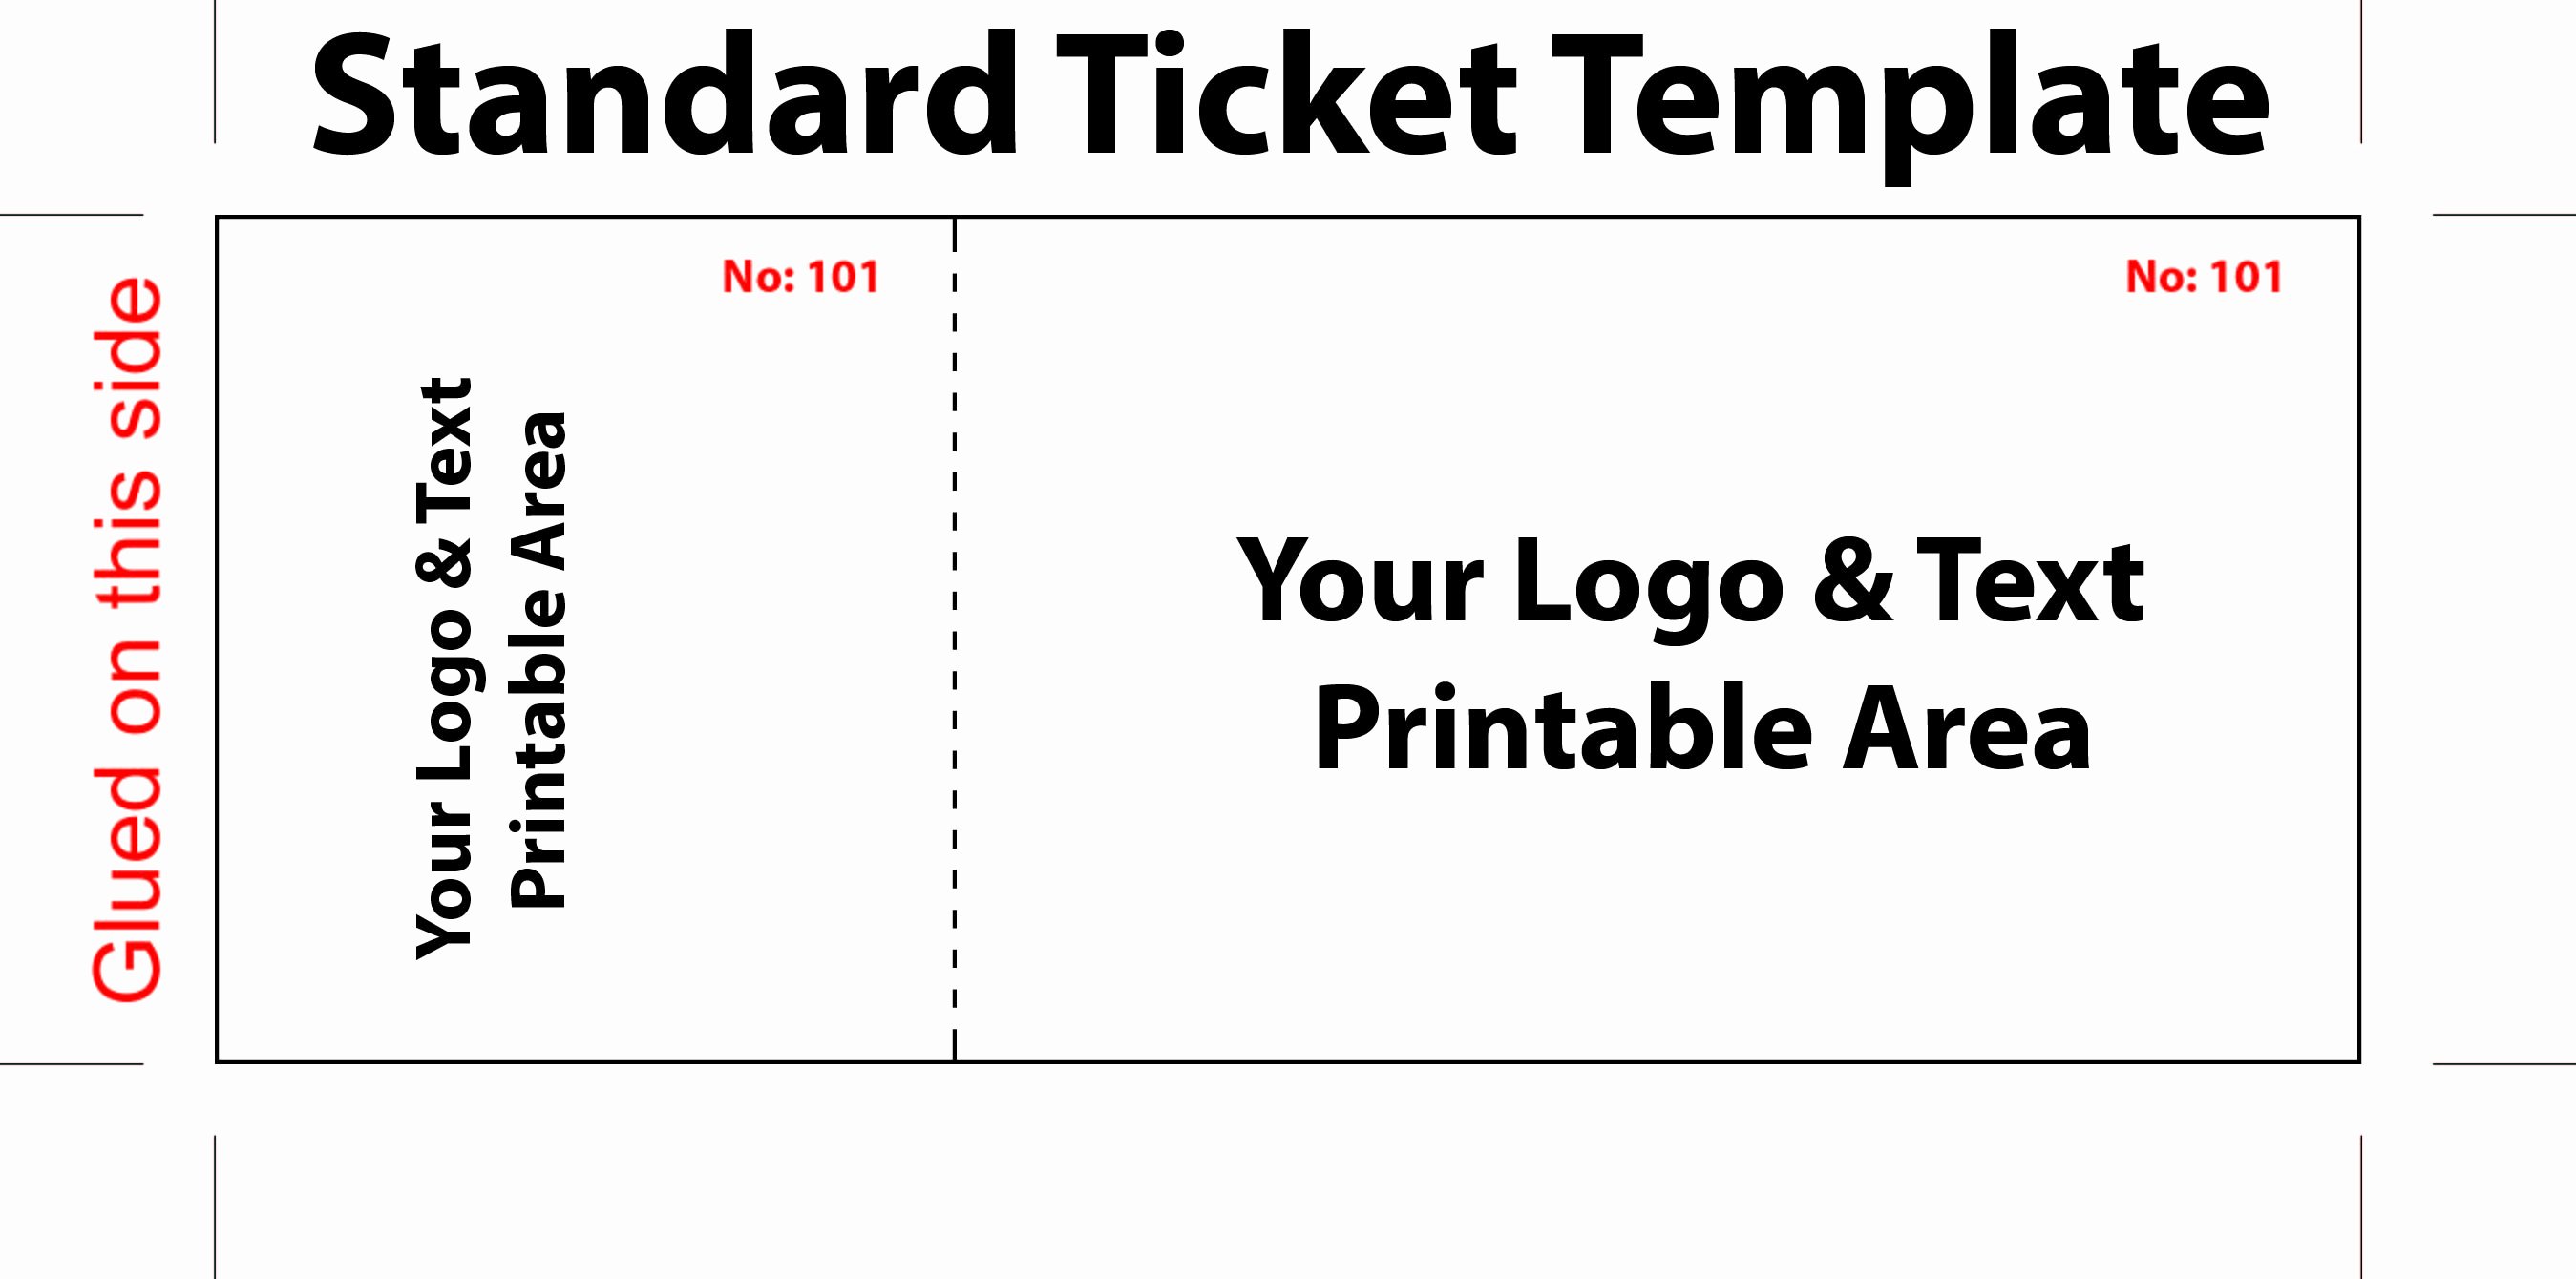 Free event Ticket Template Elegant Free Editable Standard Ticket Template Example for Concert